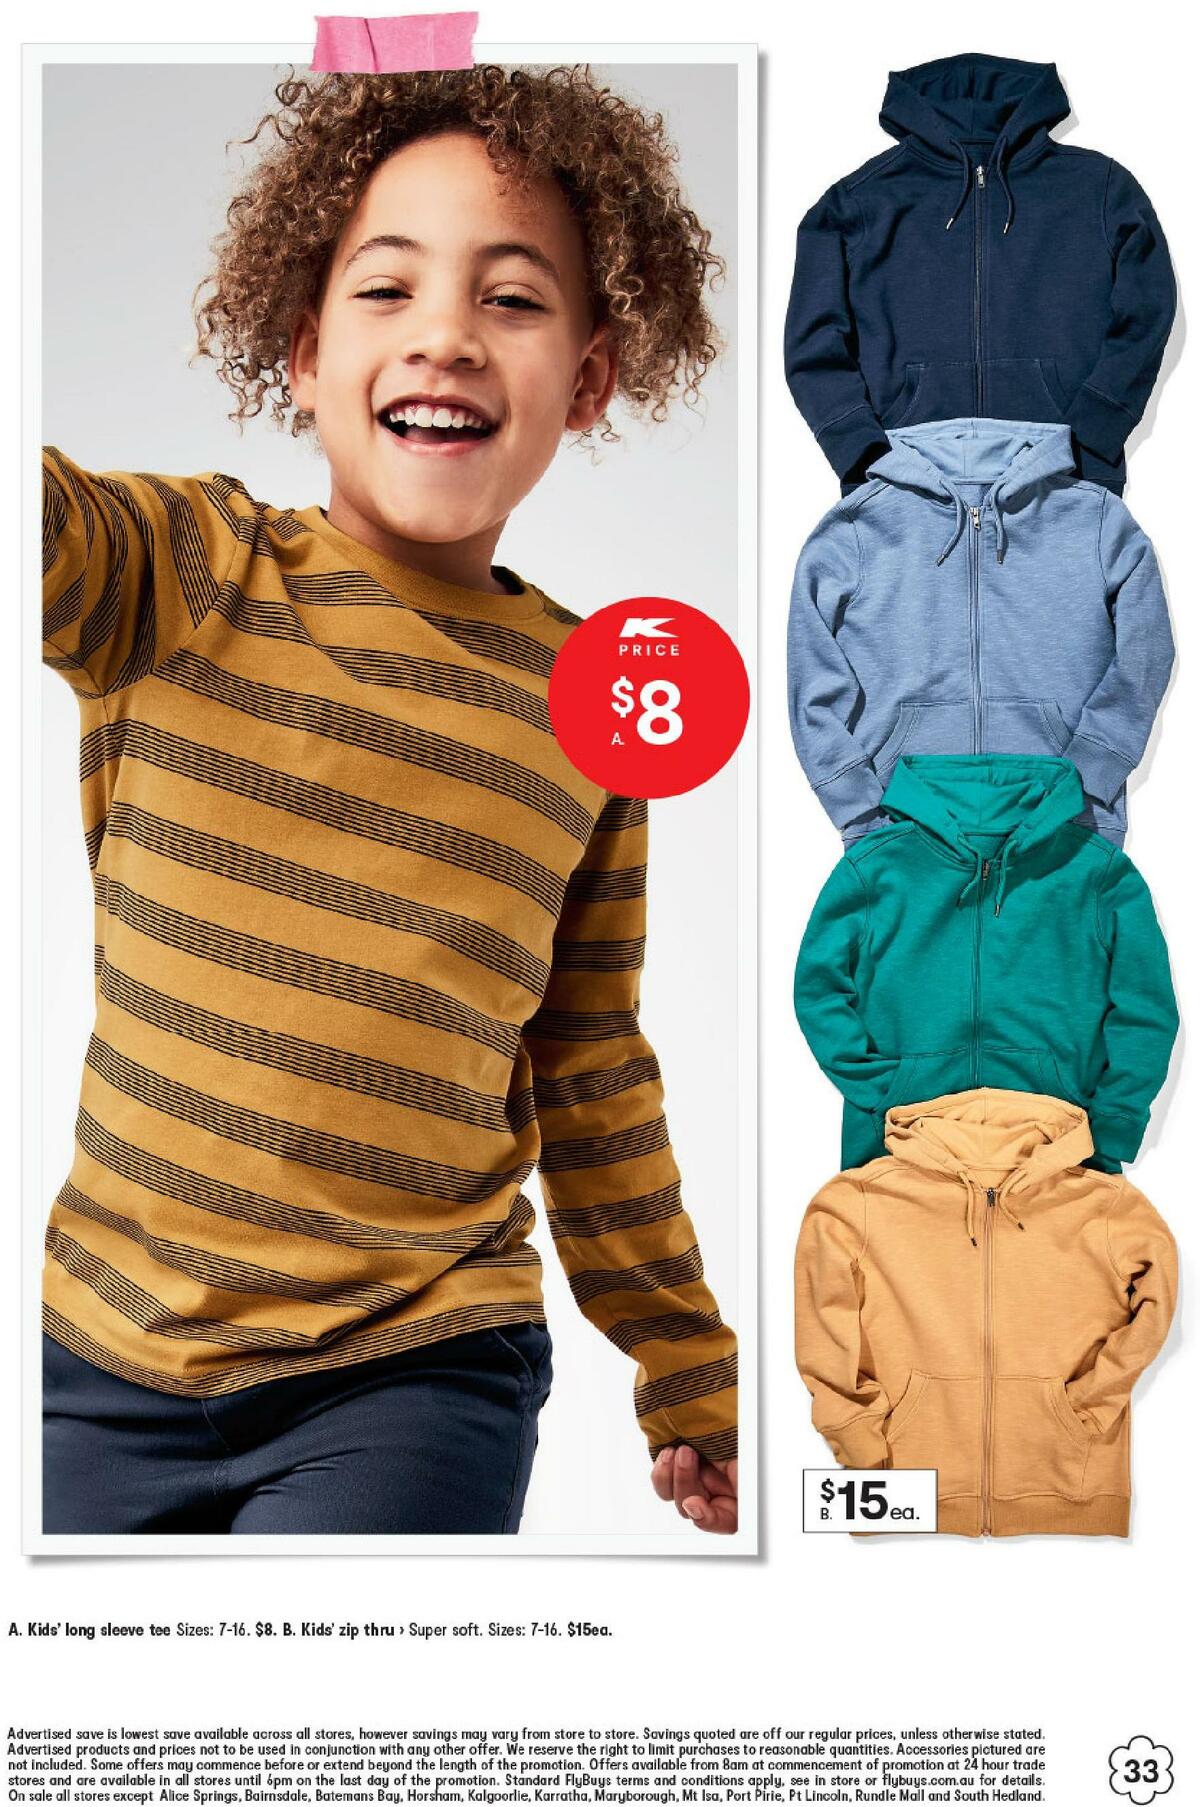 Kmart Catalogues from 25 June